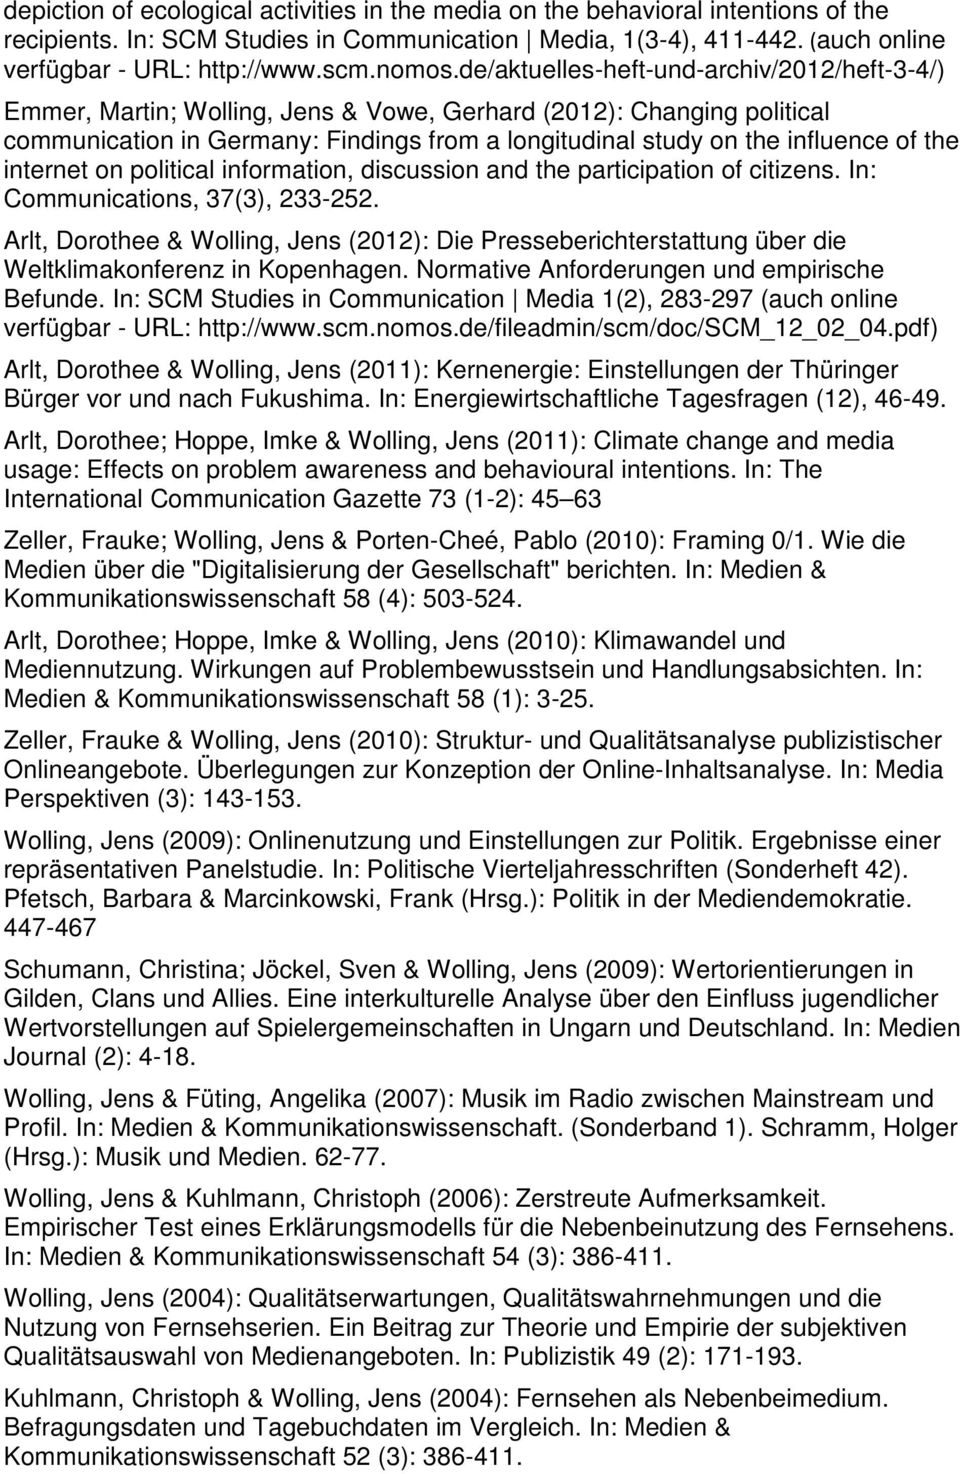 de/aktuelles-heft-und-archiv/2012/heft-3-4/) Emmer, Martin; Wolling, Jens & Vowe, Gerhard (2012): Changing political communication in Germany: Findings from a longitudinal study on the influence of